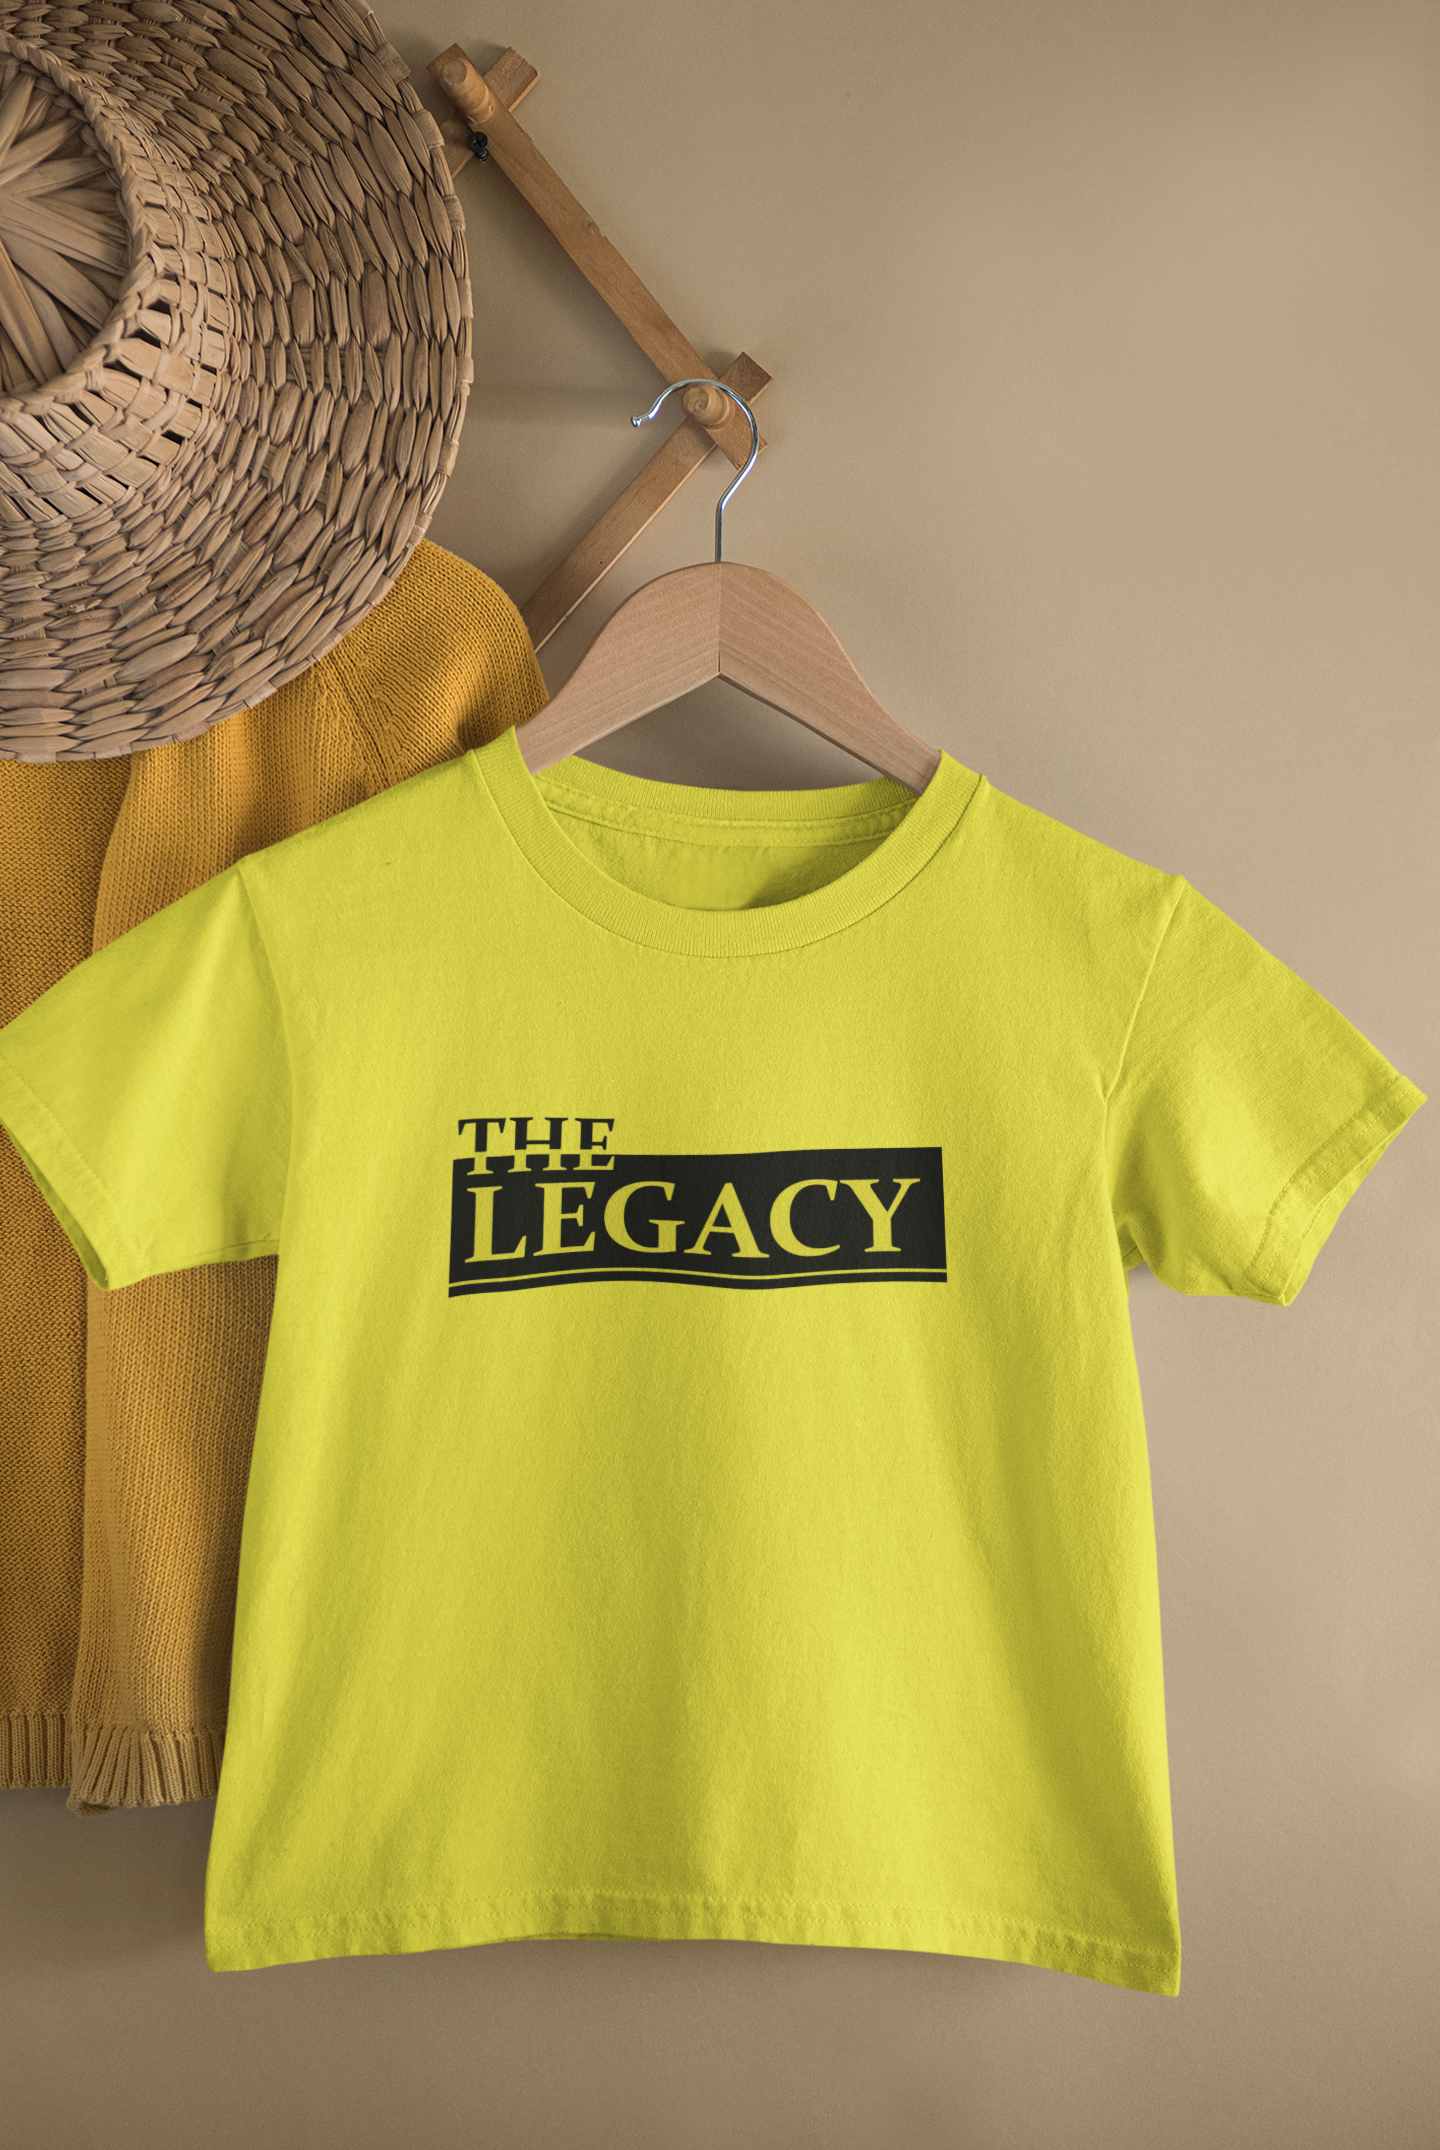 The Legend Mother And Son Yellow Matching T-Shirt- FunkyTeesClub